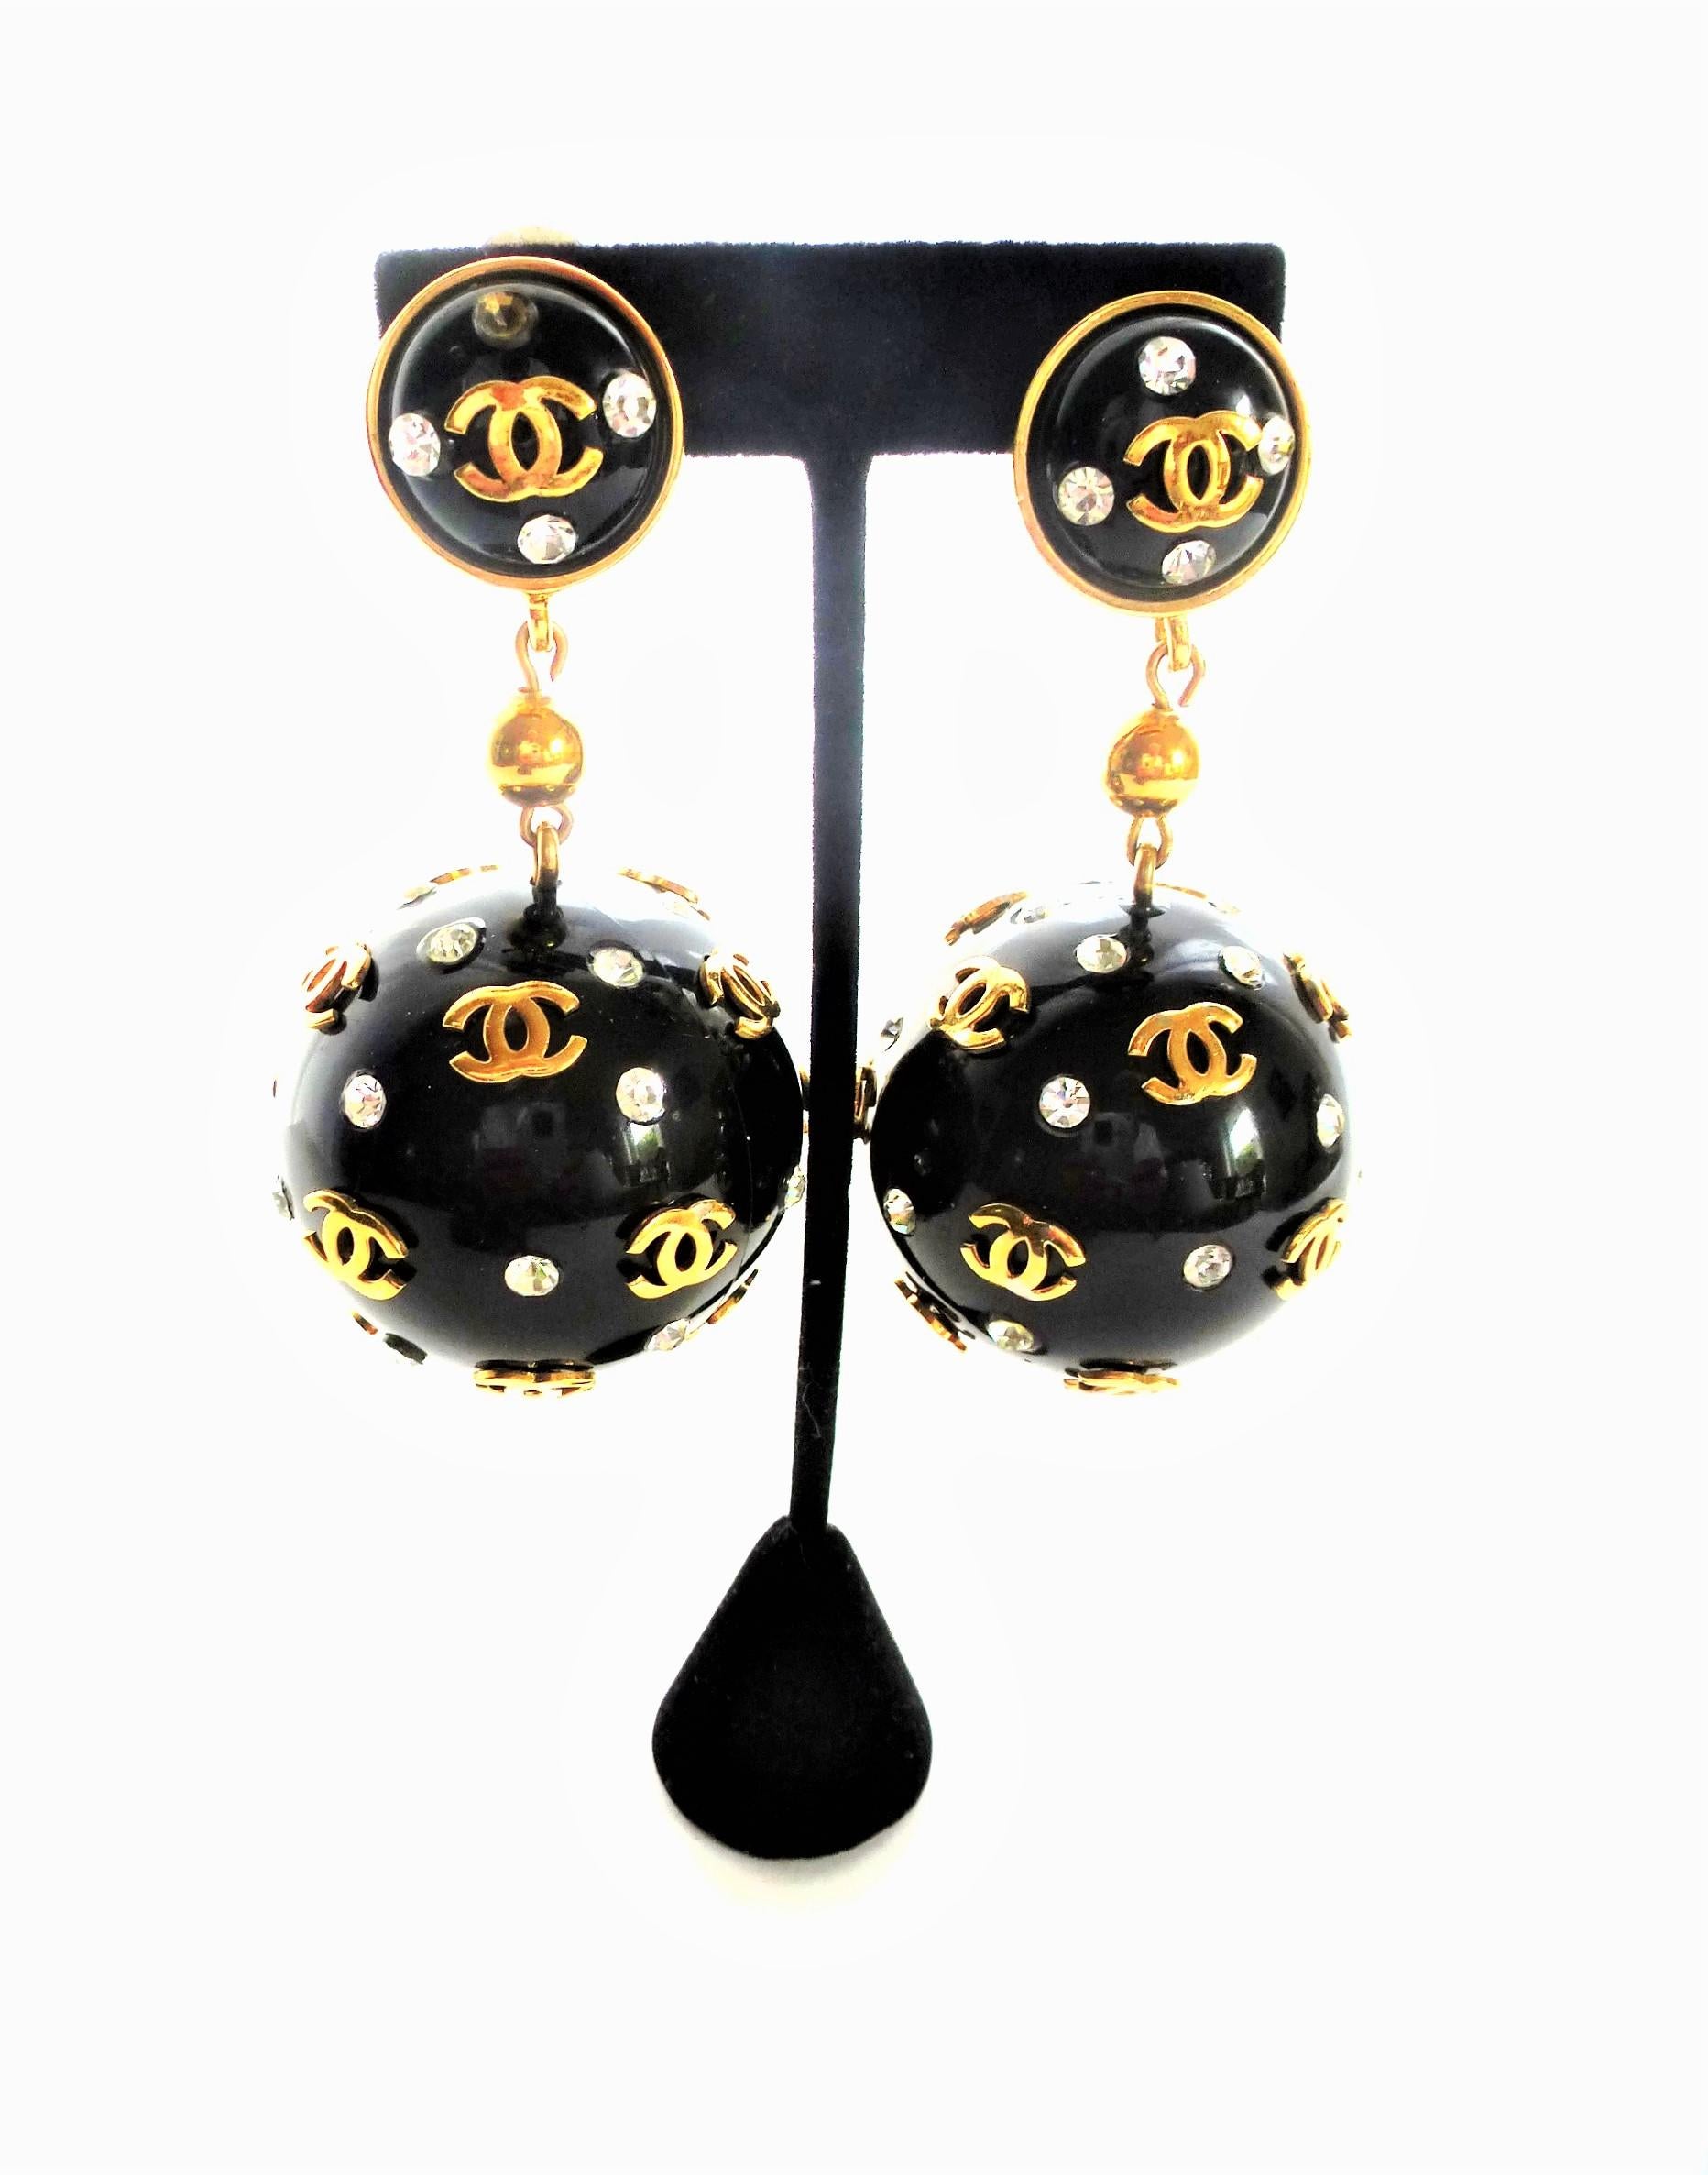 Such great Chanel ball clip on earring set with iconic CC and embedded clear rhinestones. 
Signed CHANEL in capital letters.
Measurement: Full length 9 cm.  Upper part with clip and signature 2 cm in diameter, the large ball has a diameter of 4 cm, 